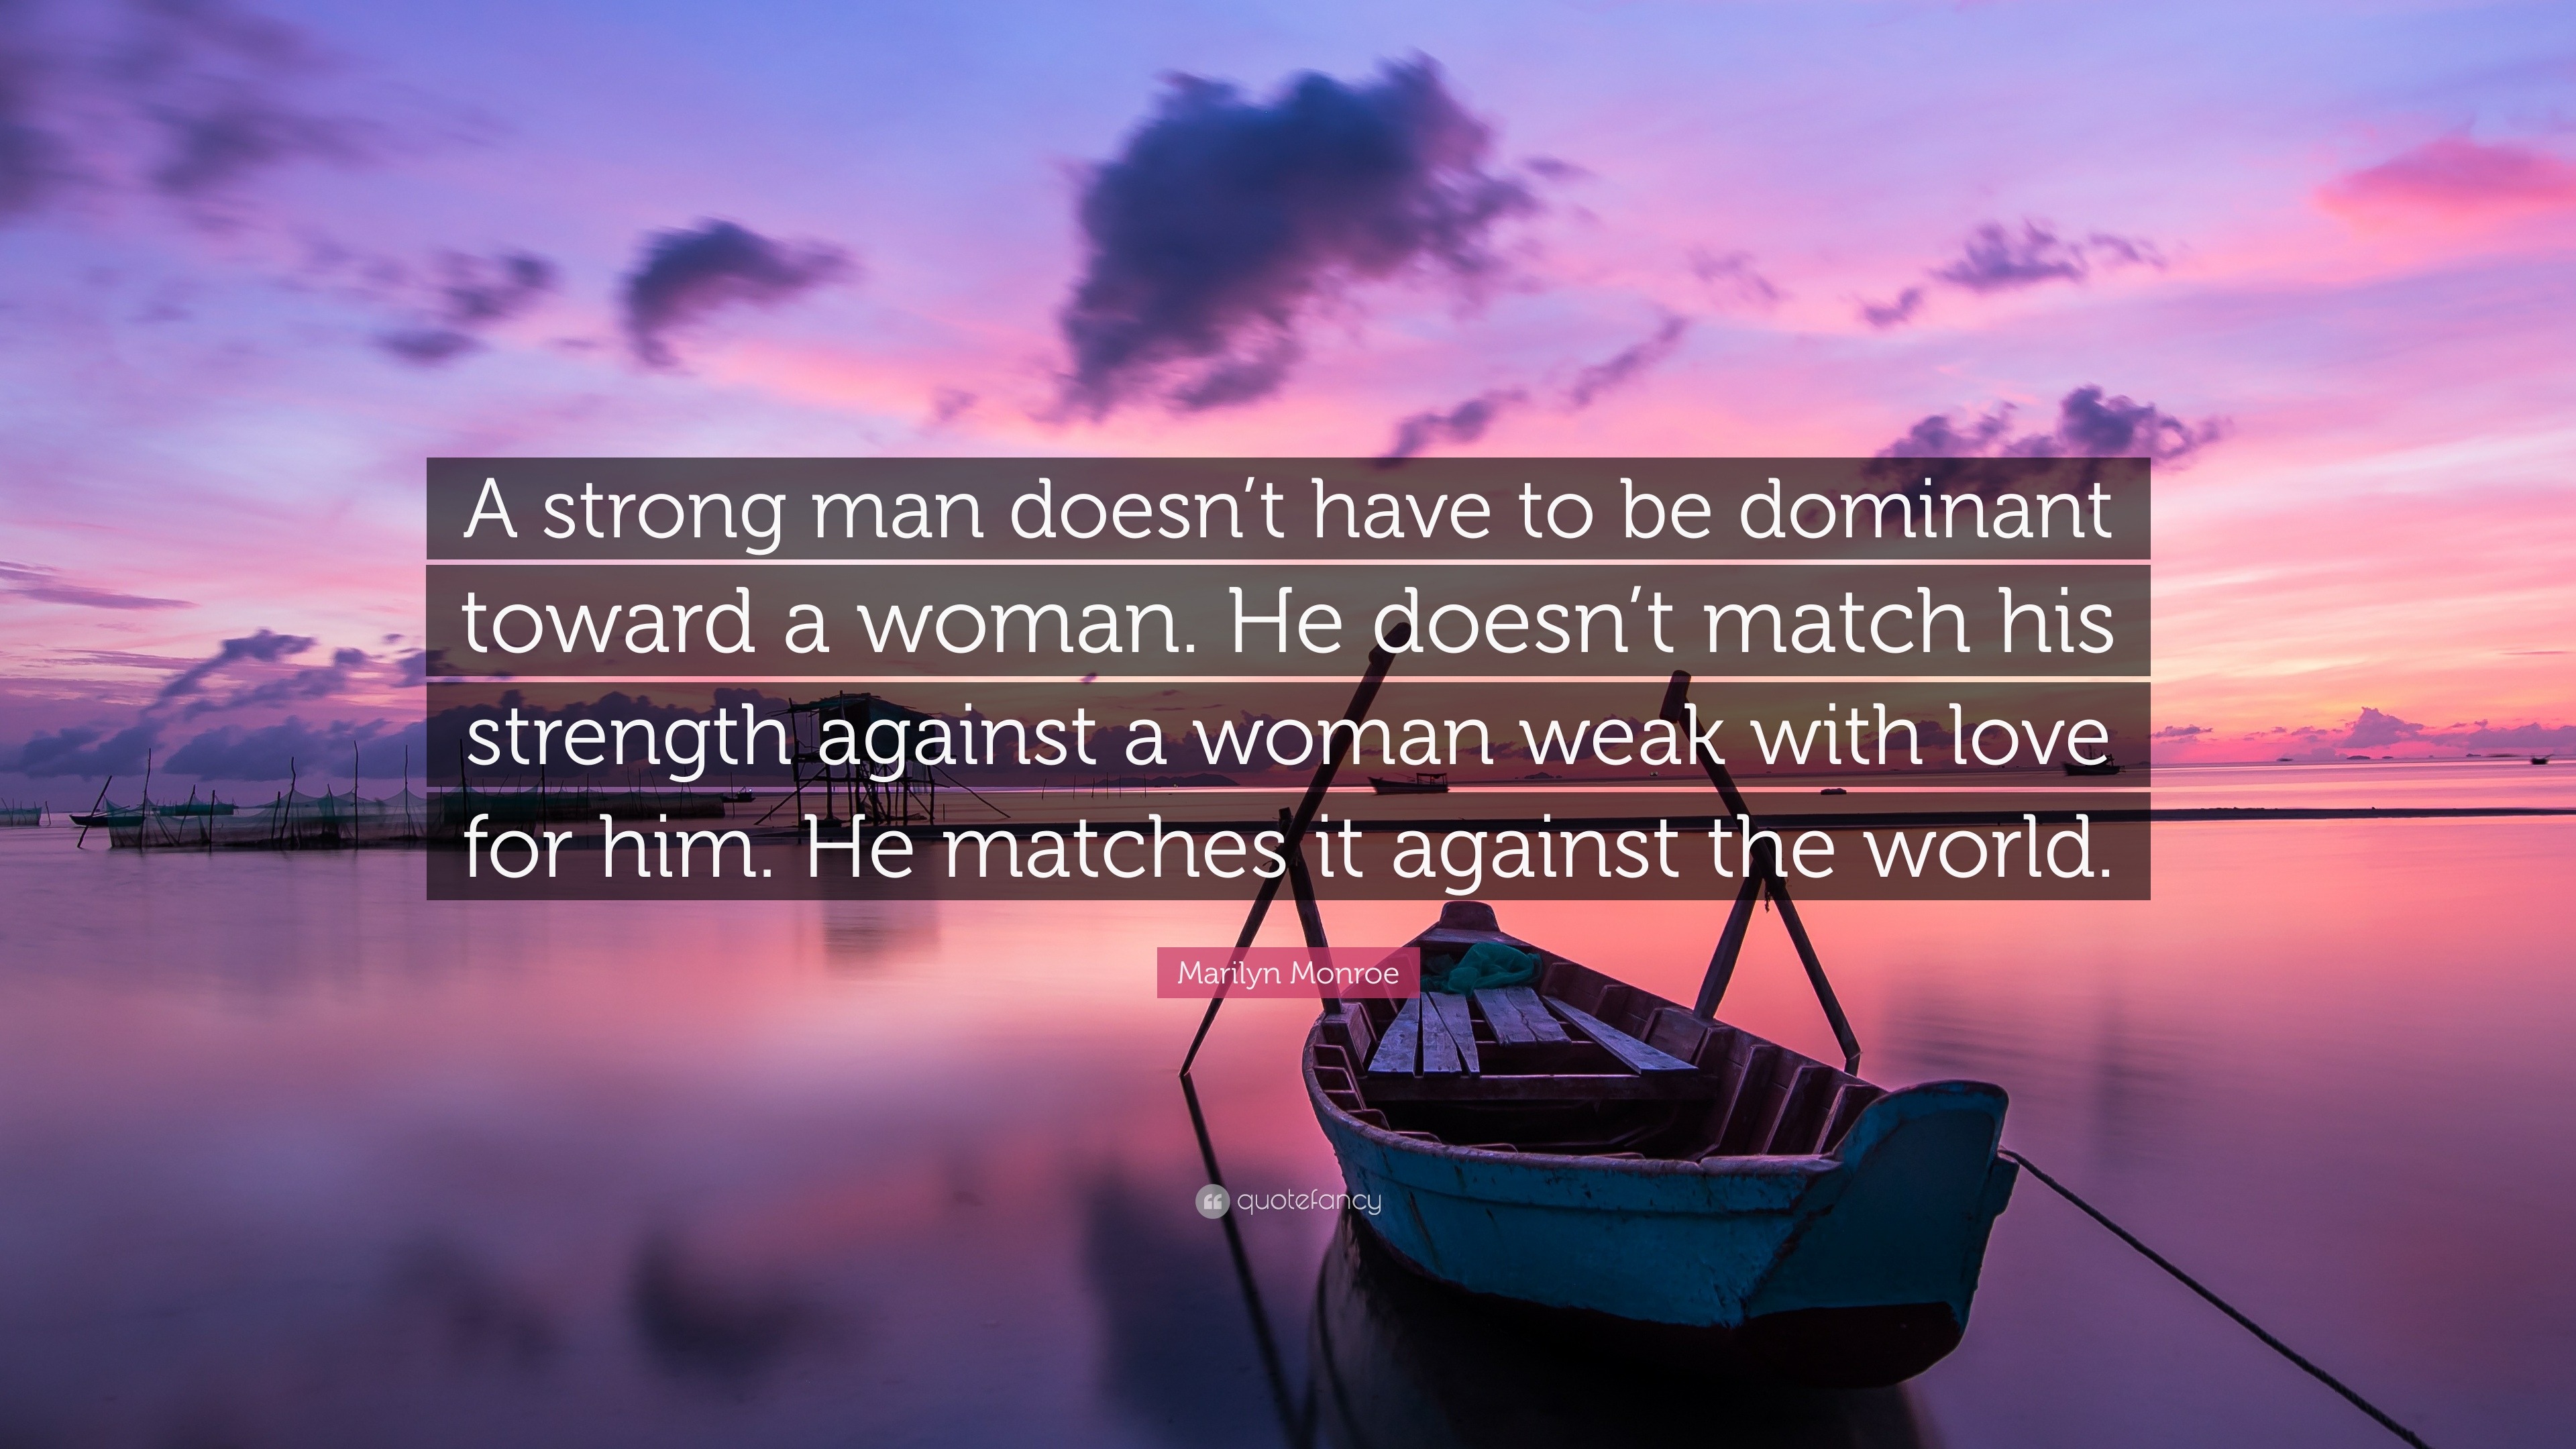 Marilyn Monroe Quote: “A strong man doesn’t have to be dominant toward ...